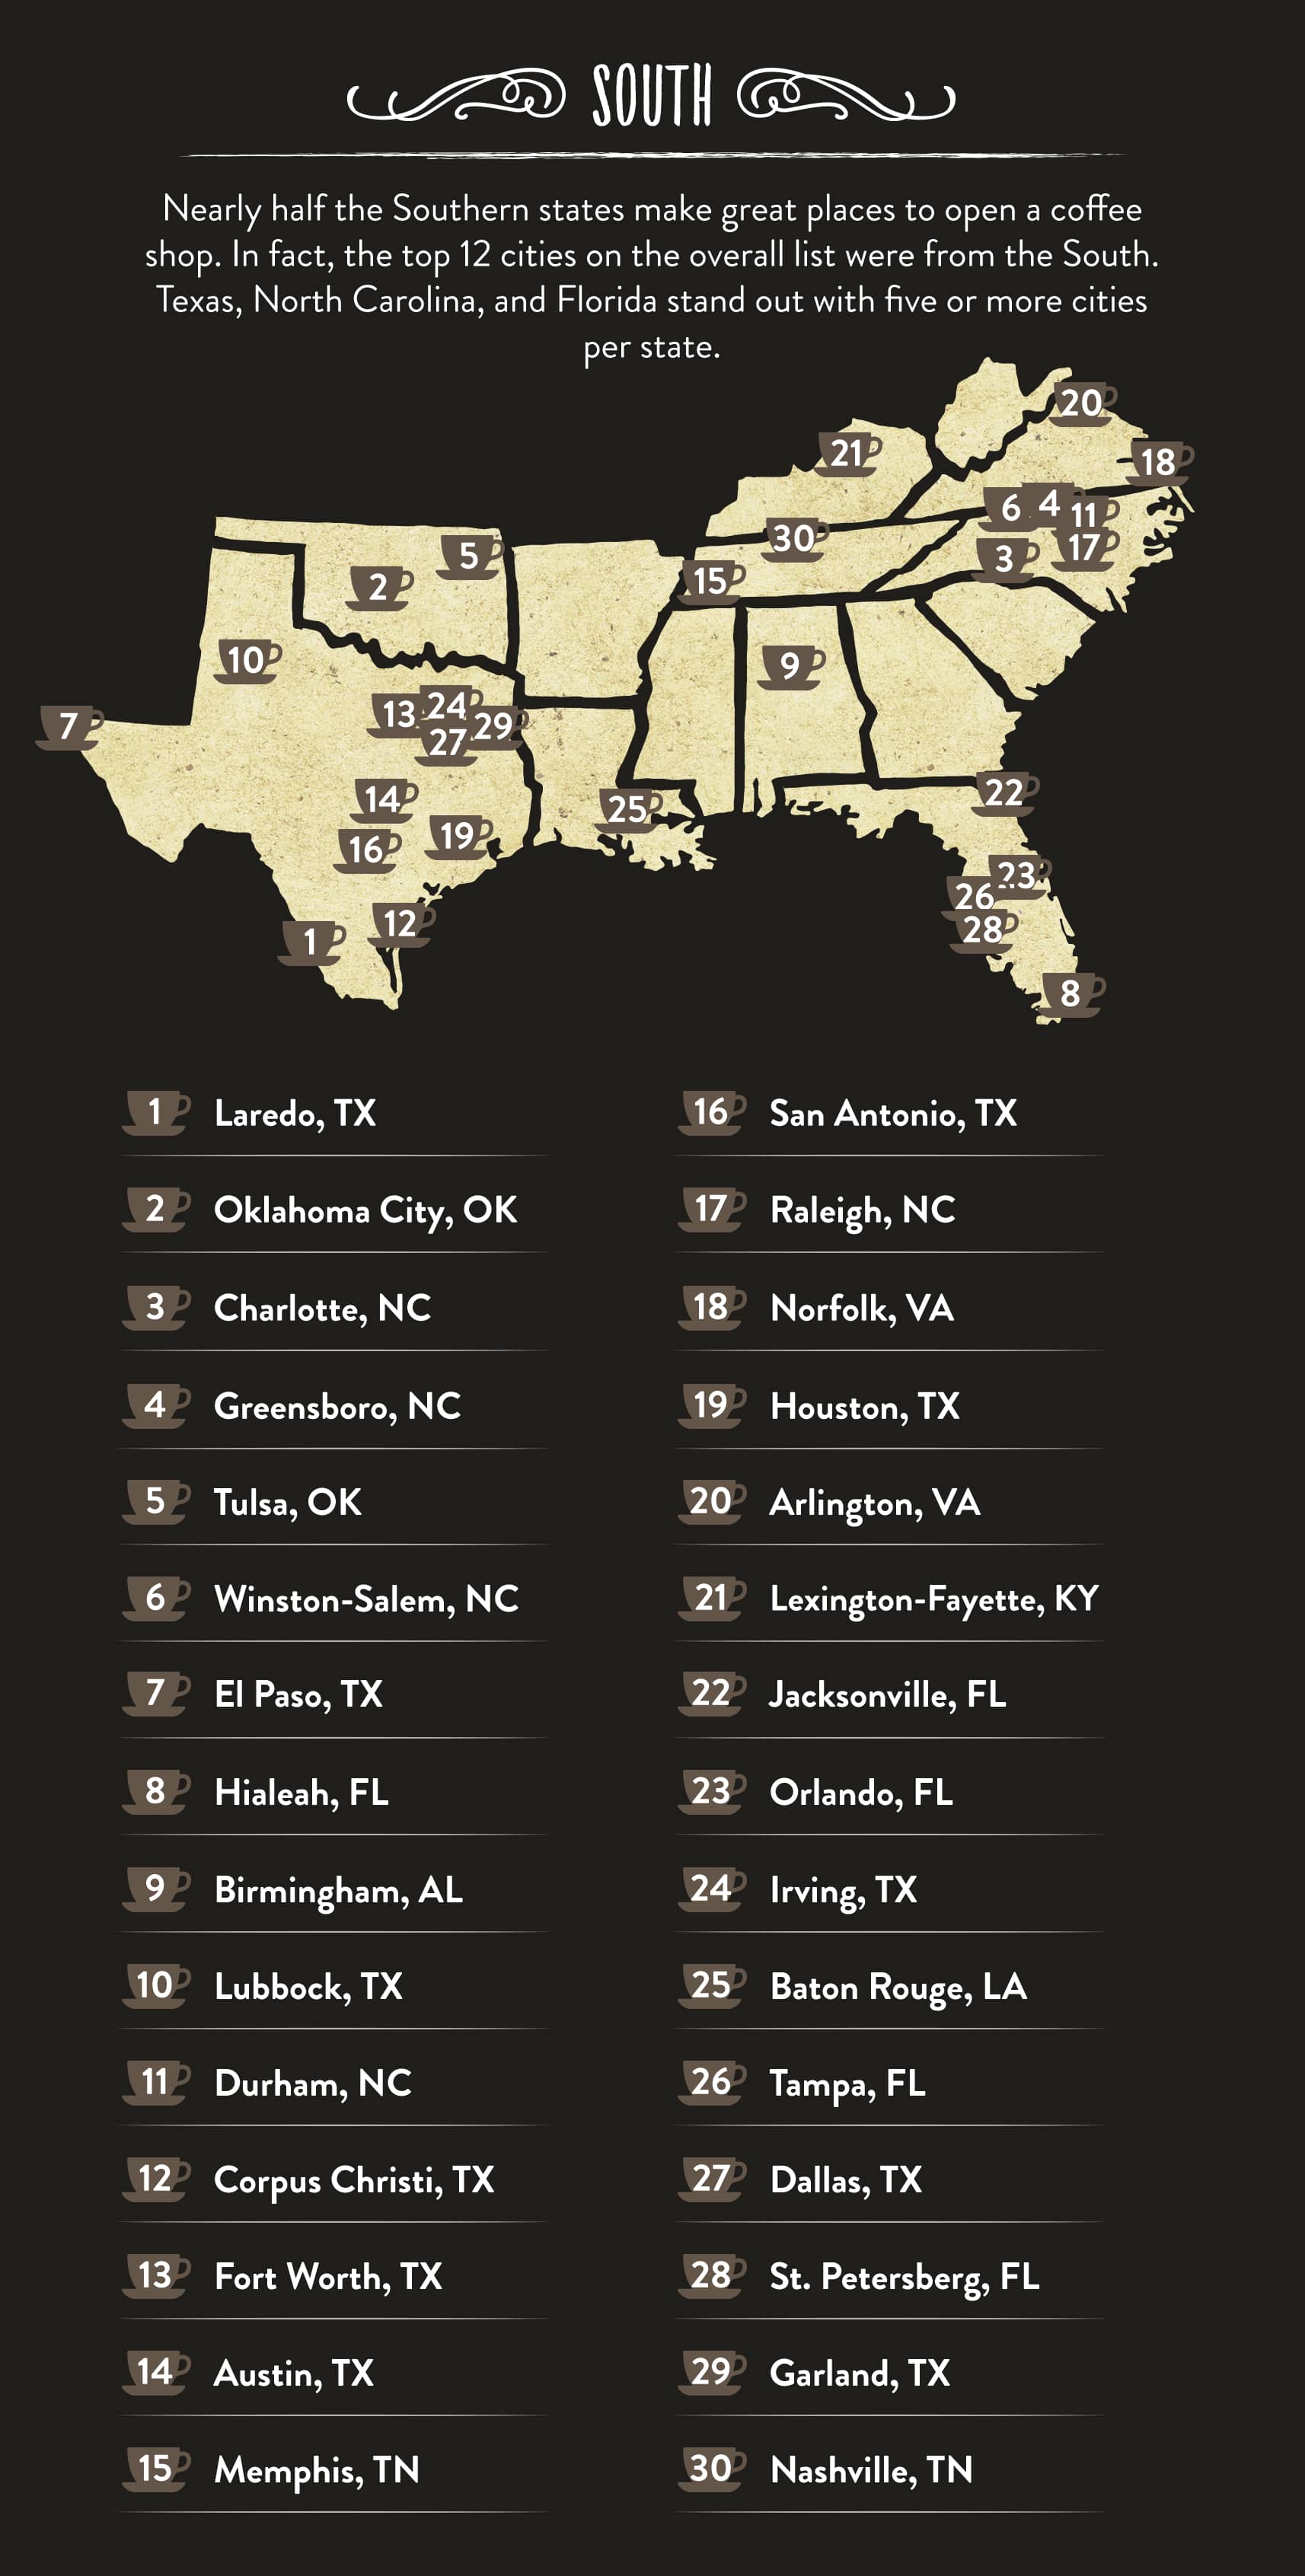 Best Coffee Cities in the South